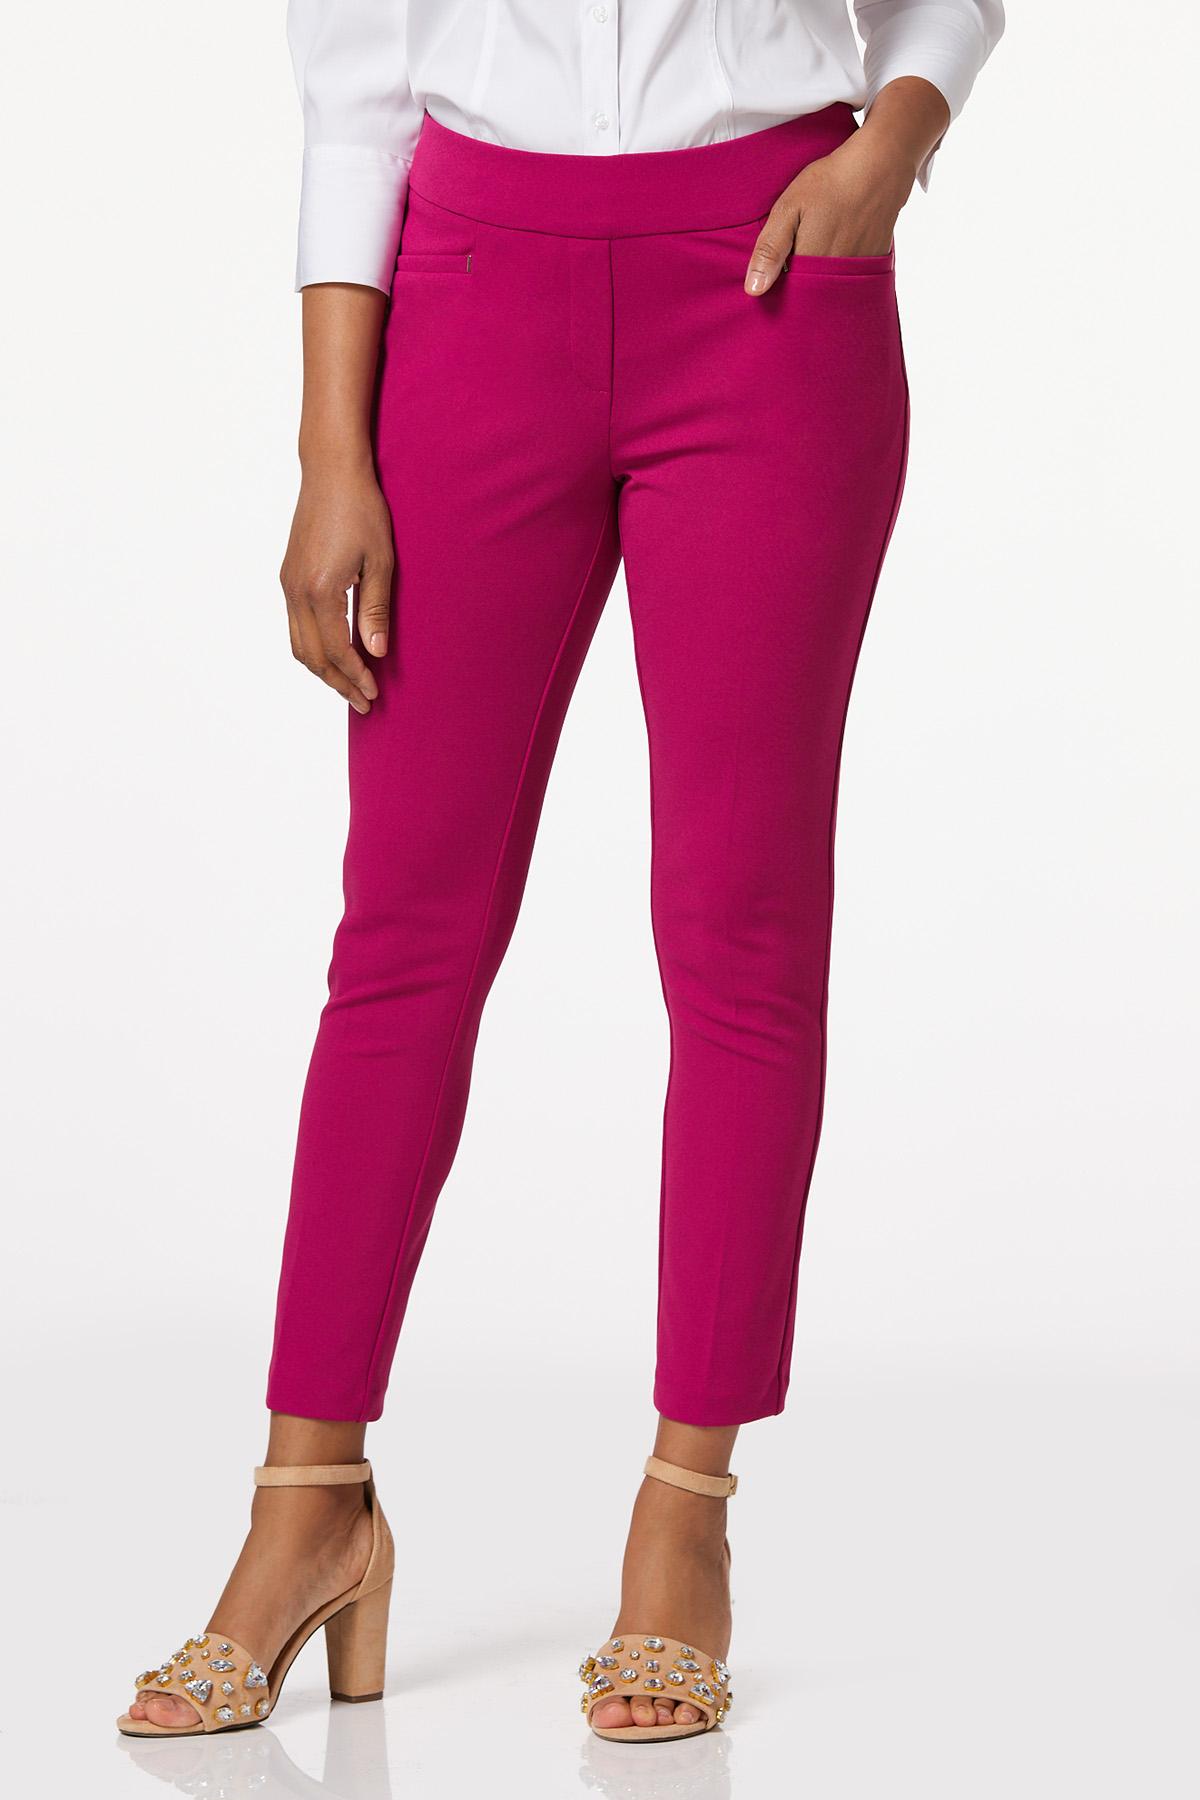 Cato Fashions  Cato Slim Ankle Pants